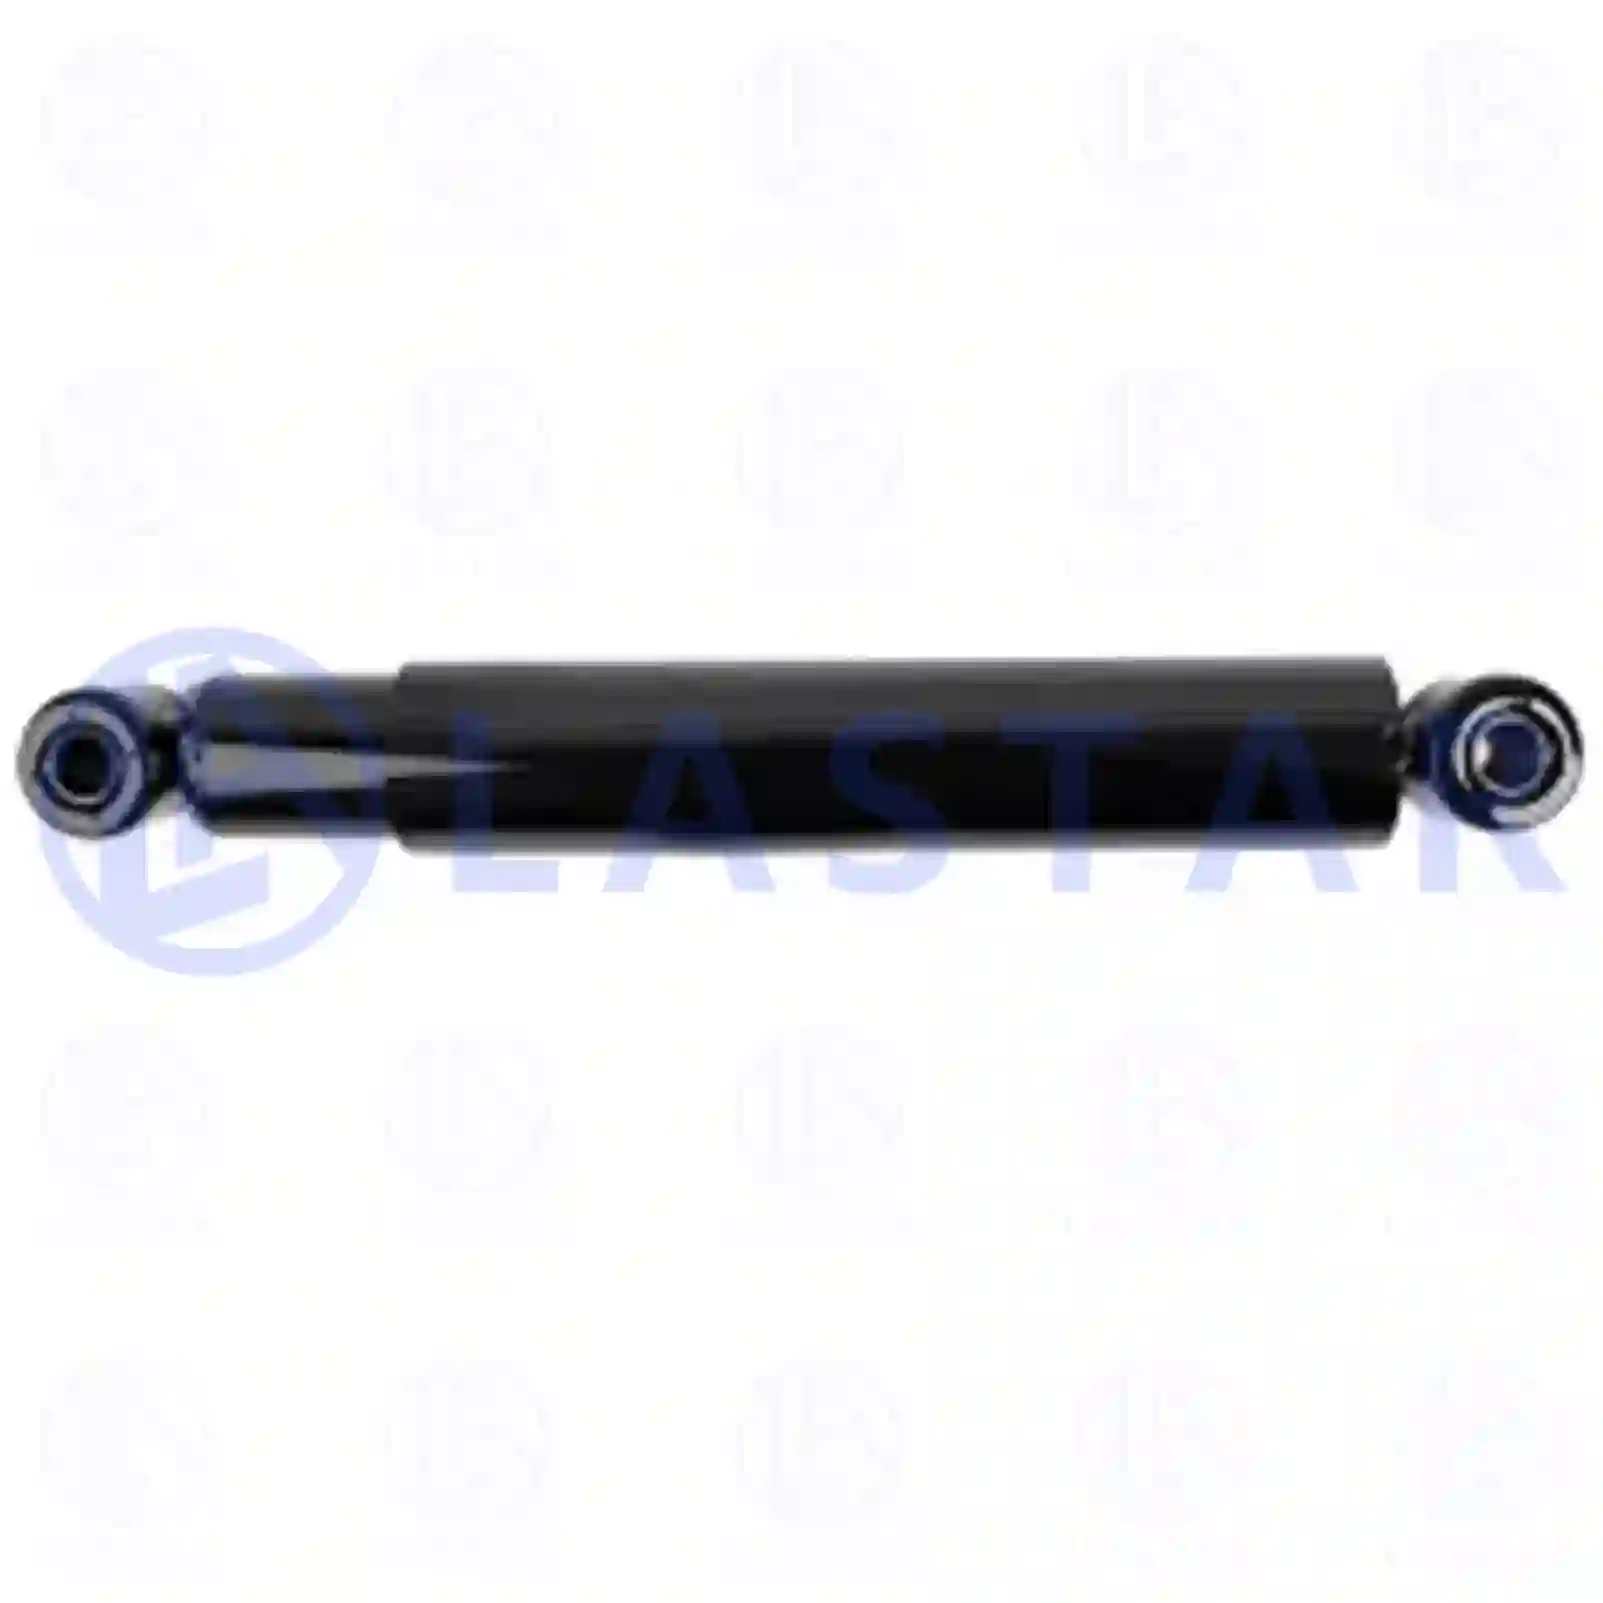 Shock absorber, 77727869, 0063234500, , , , ||  77727869 Lastar Spare Part | Truck Spare Parts, Auotomotive Spare Parts Shock absorber, 77727869, 0063234500, , , , ||  77727869 Lastar Spare Part | Truck Spare Parts, Auotomotive Spare Parts